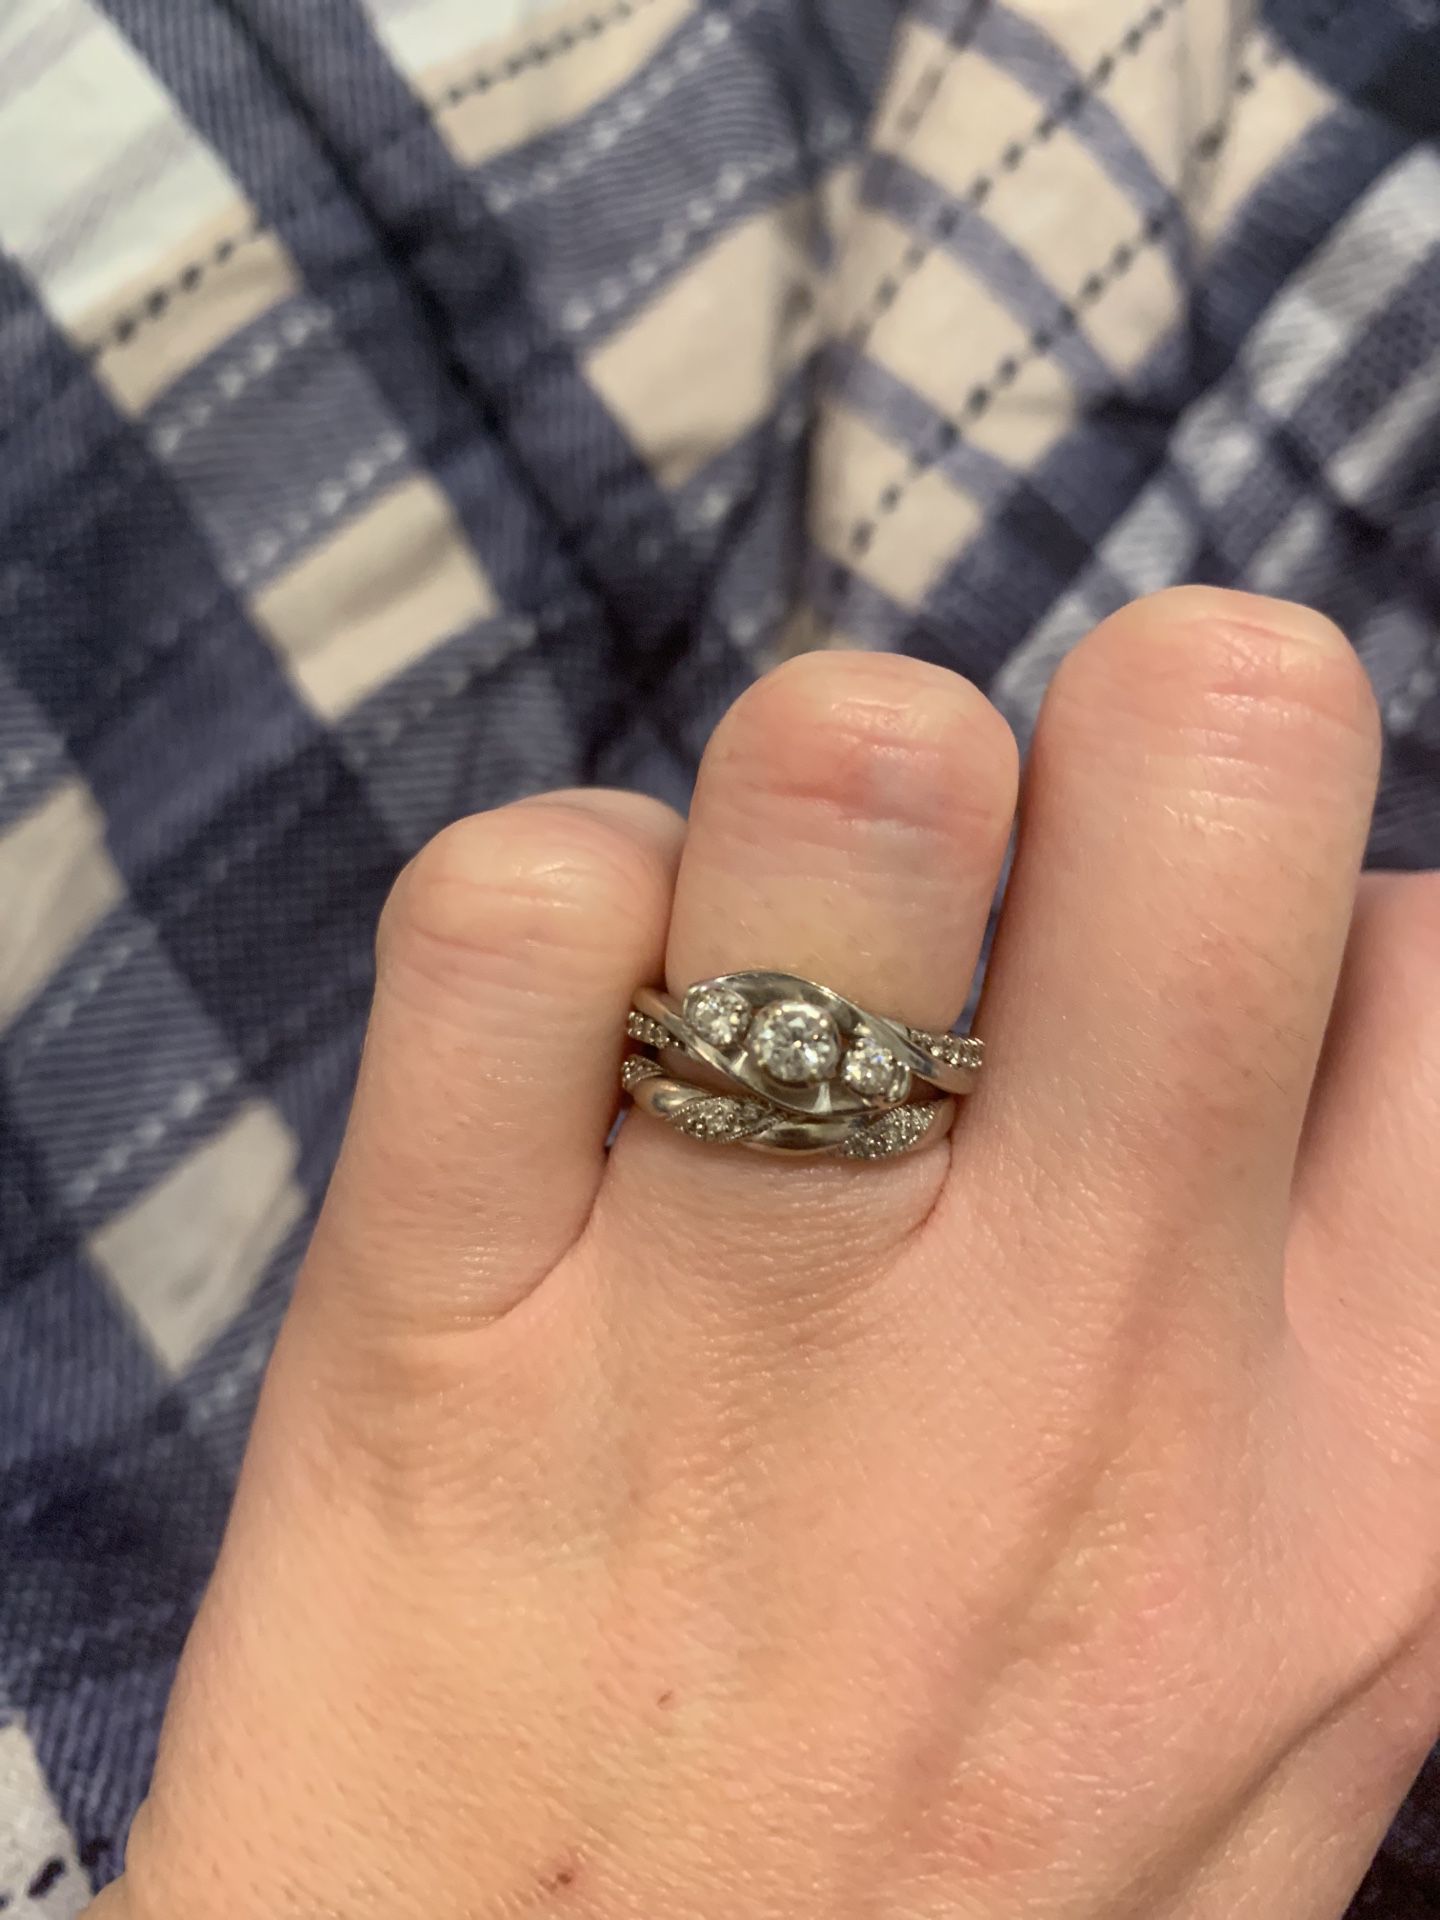 Engagement ring and wedding band size 4